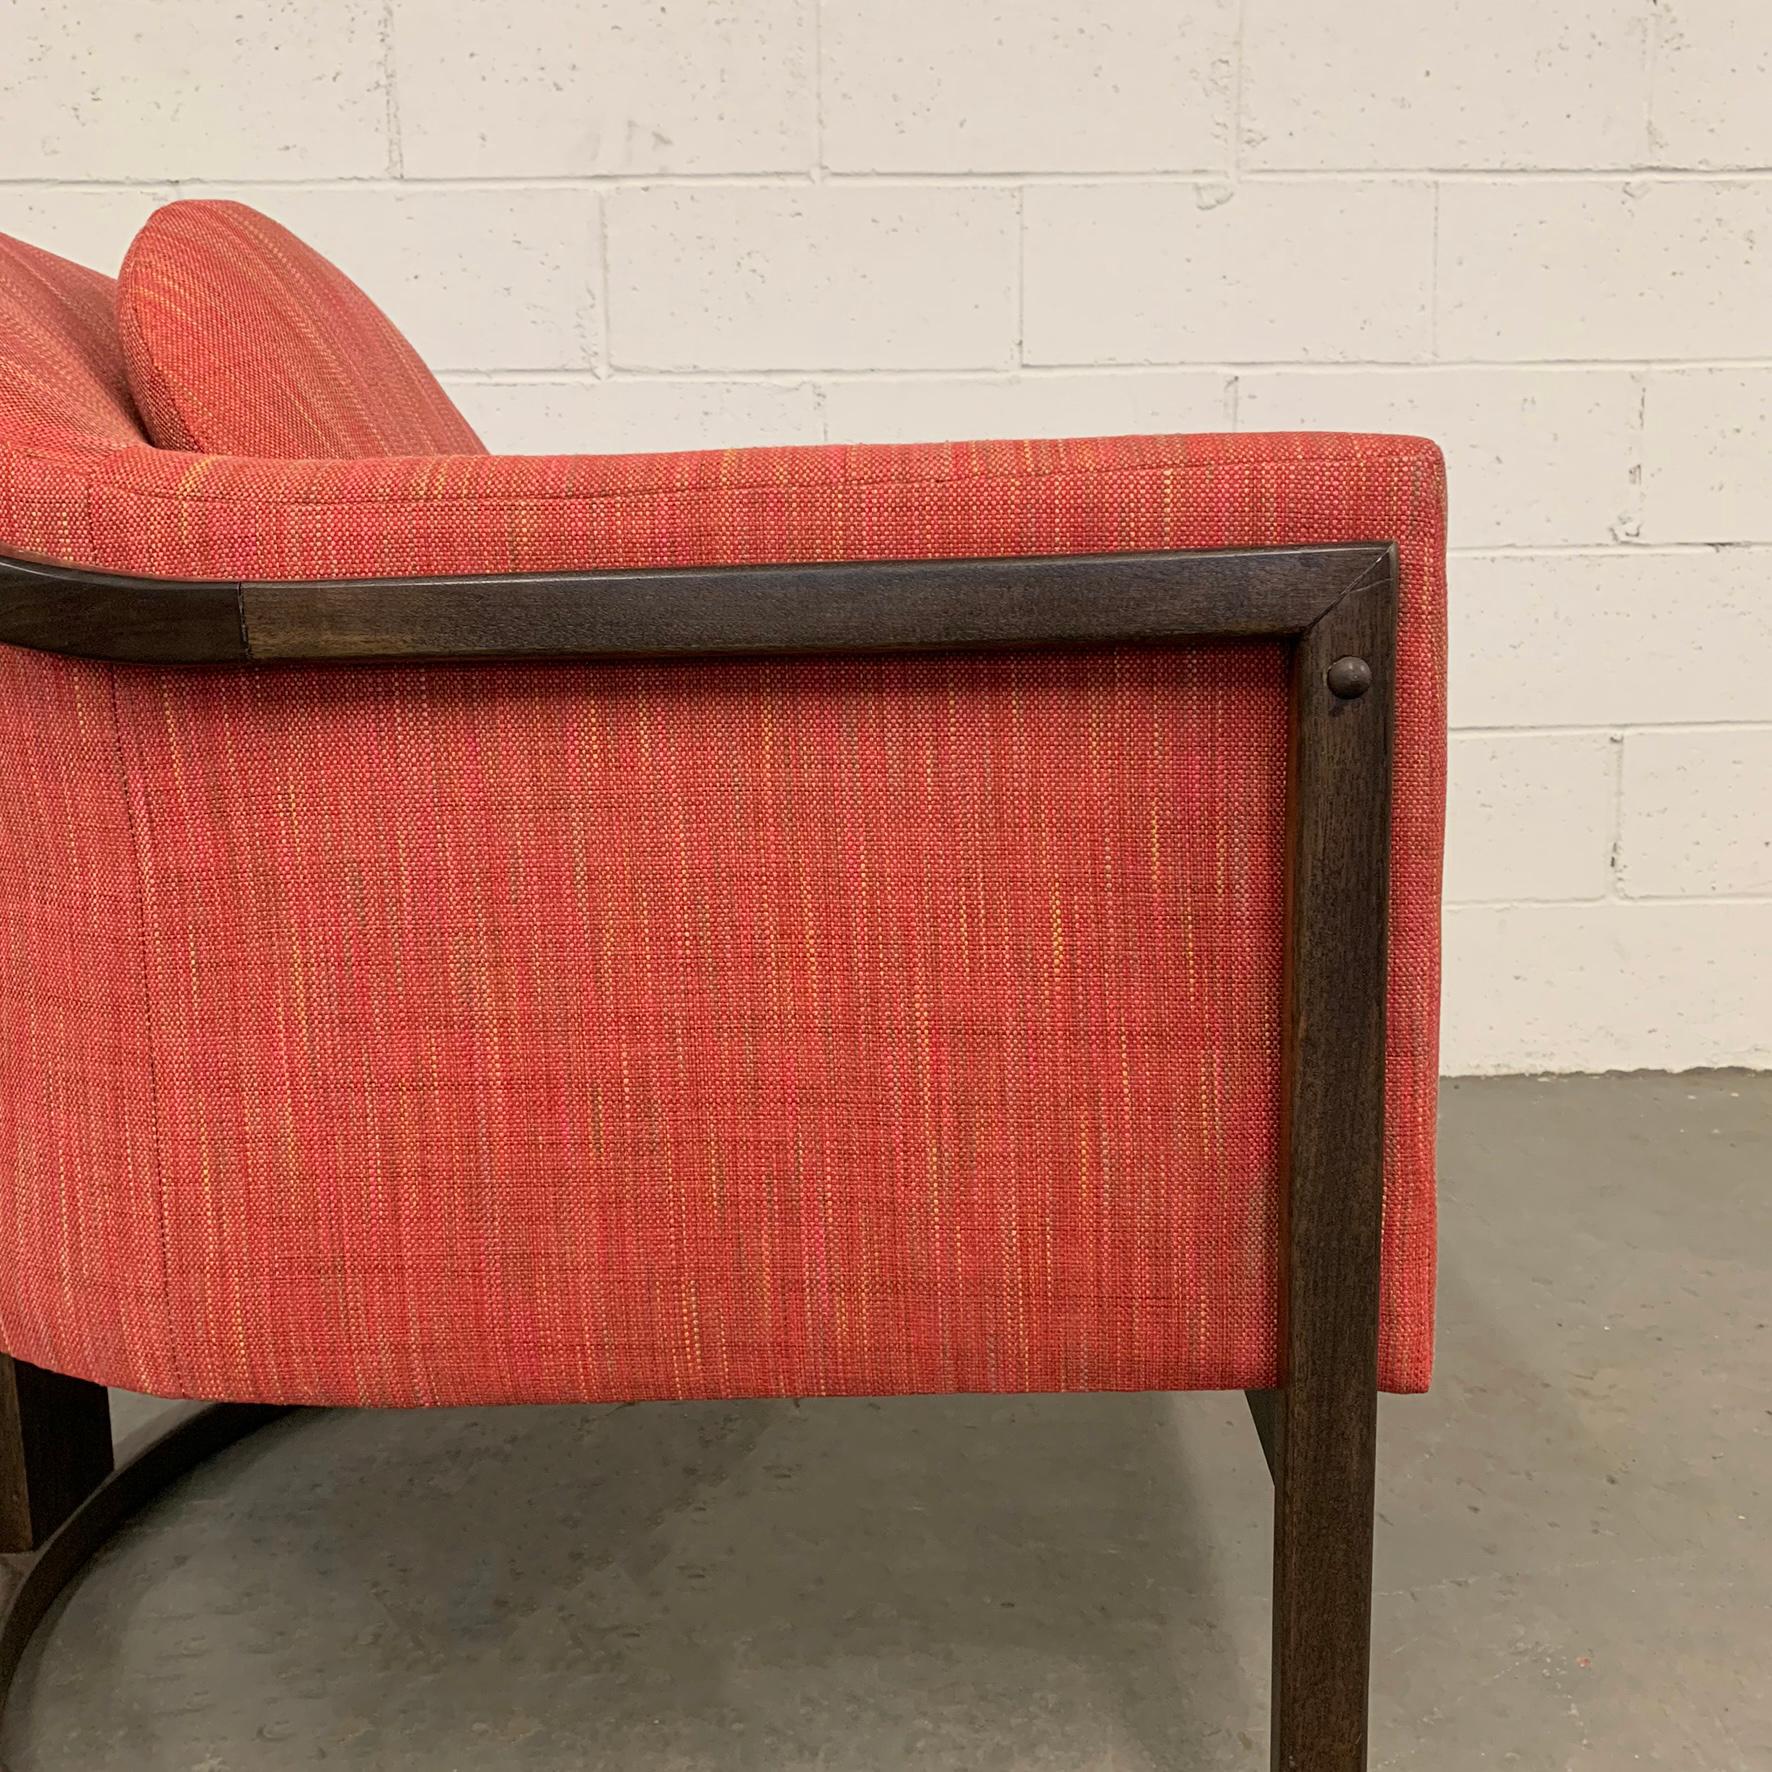 20th Century Mid-Century Modern Upholstered Barrel Club Chair Attributed to Harvey Probber For Sale